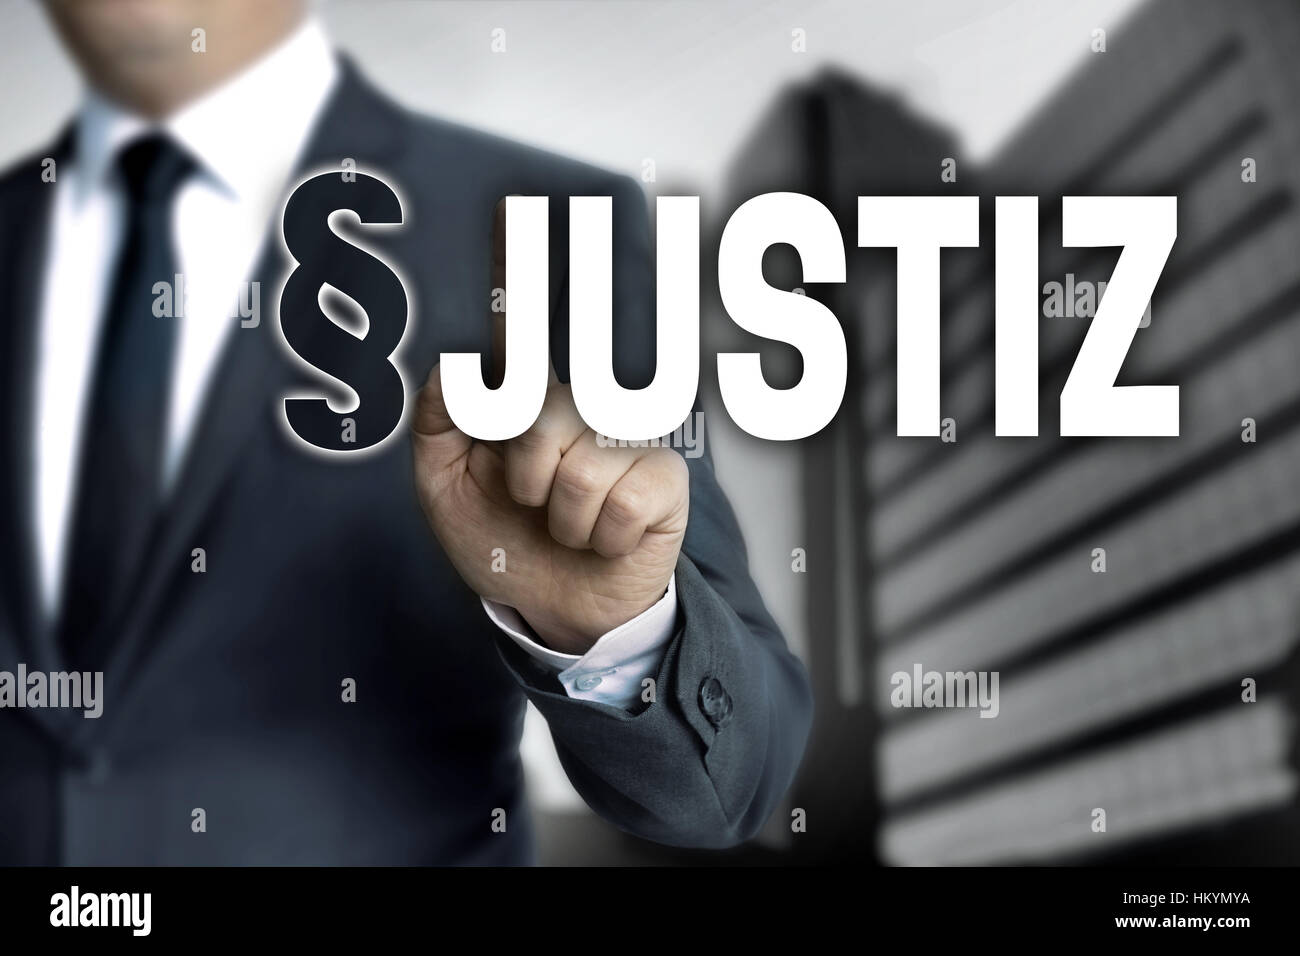 Justiz (in german Justice) is shown by businessman. Stock Photo